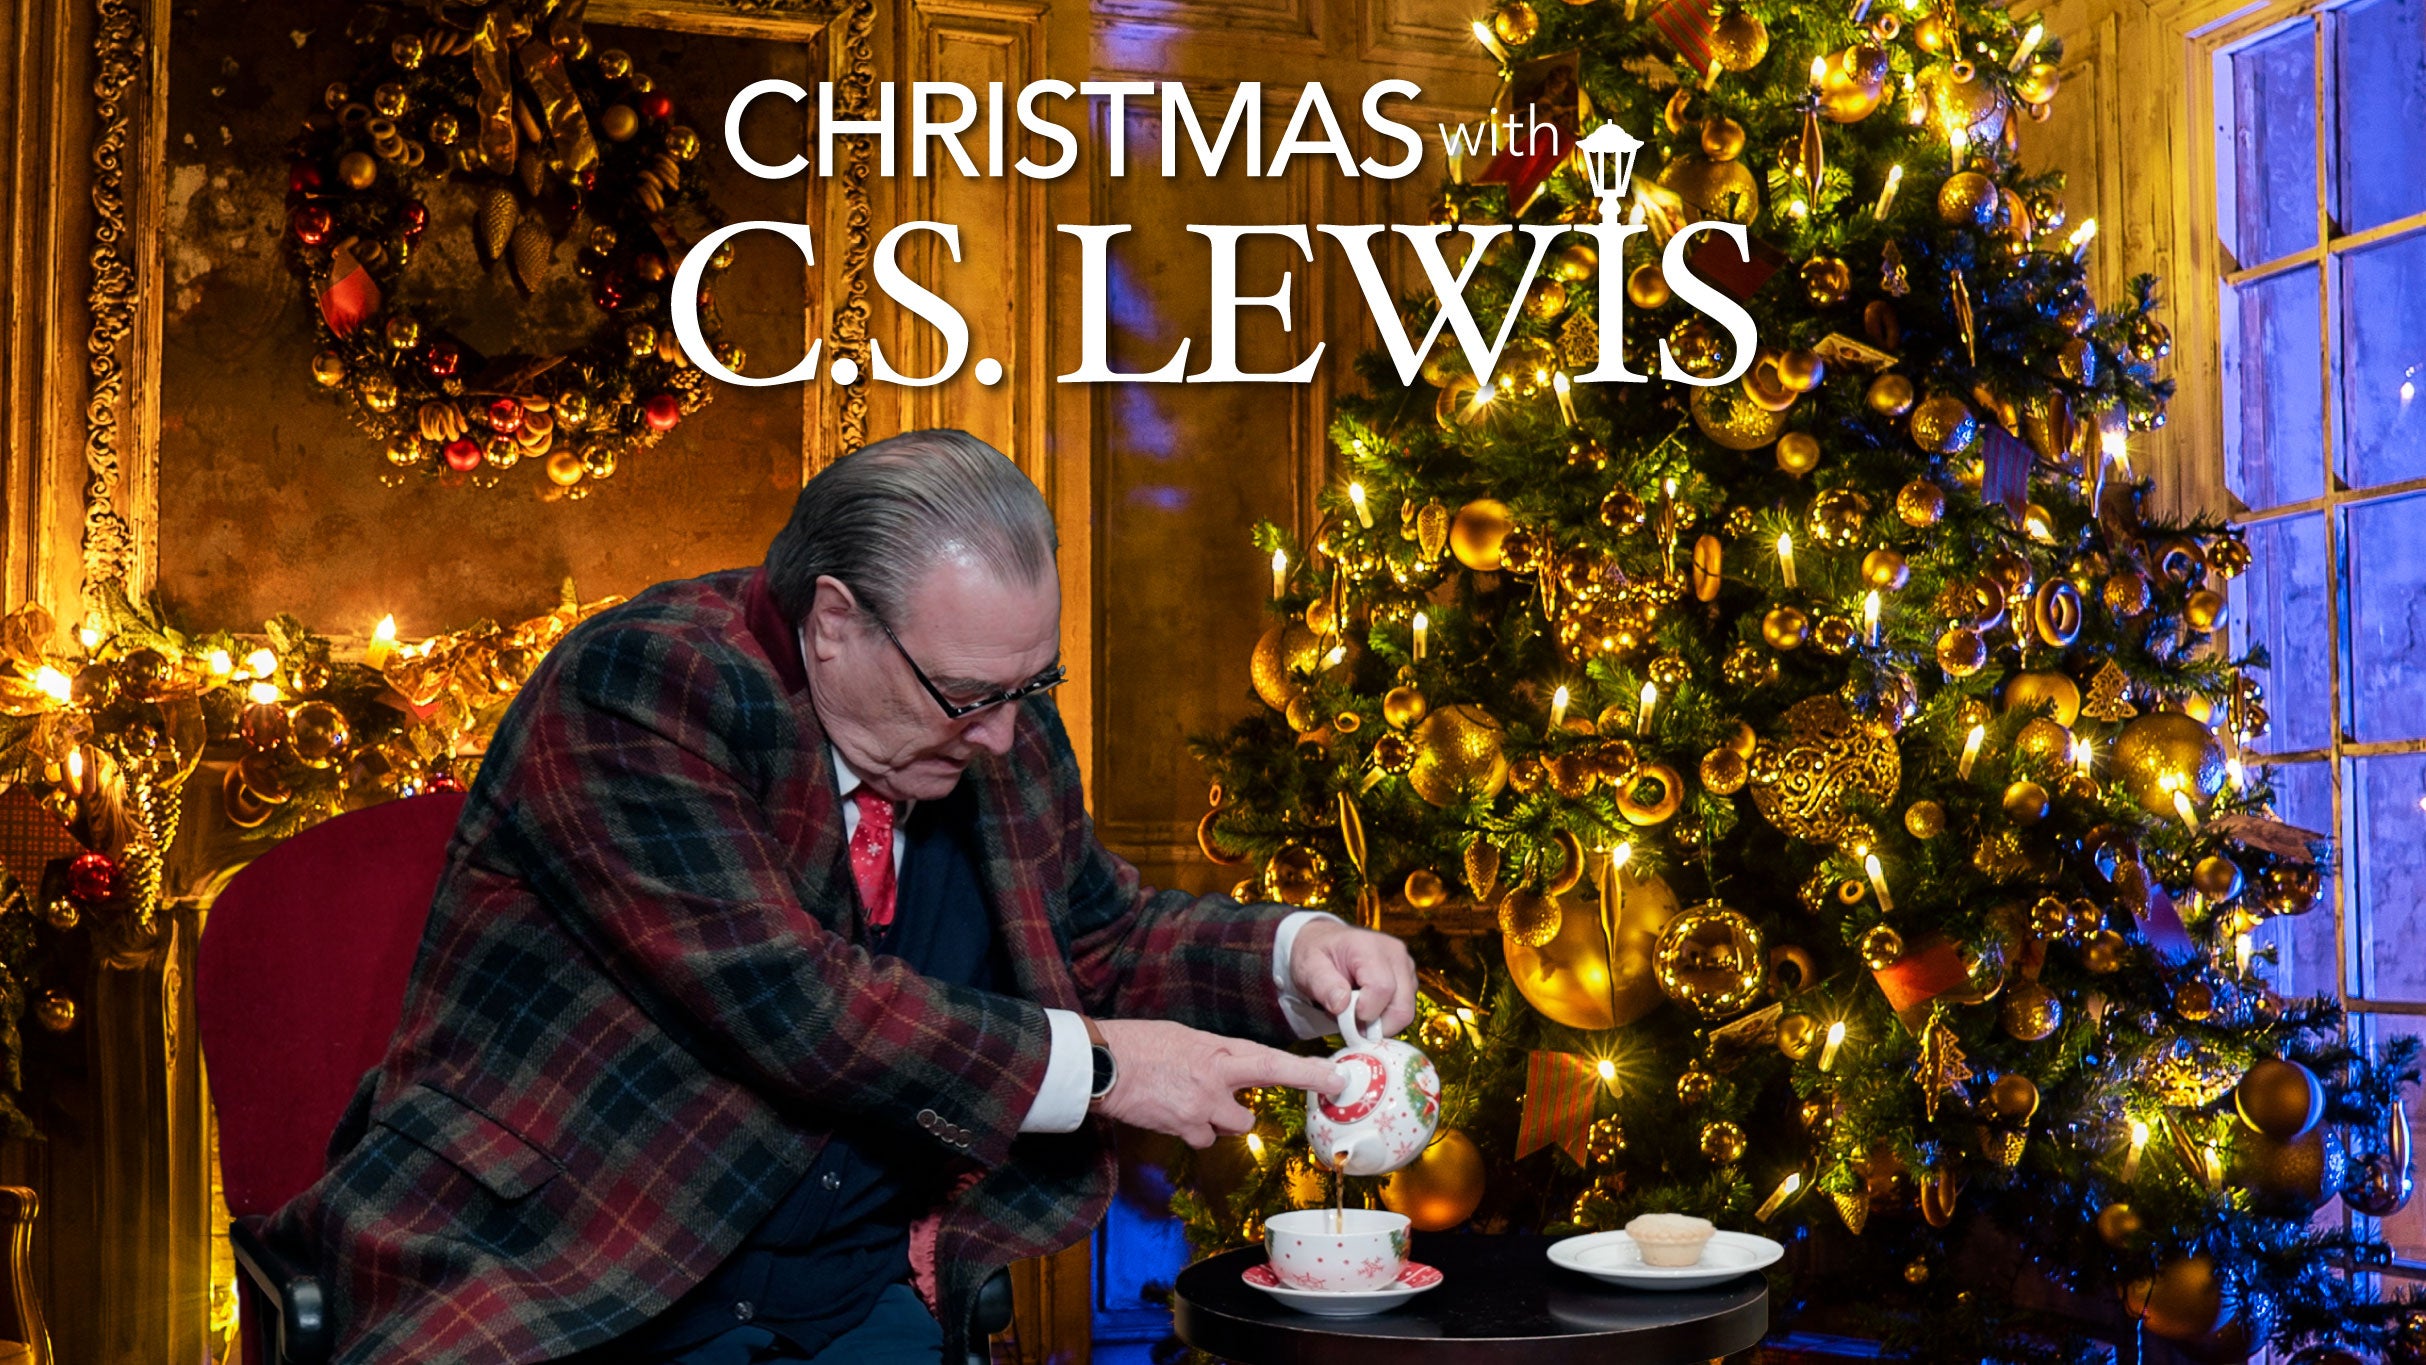 exclusive presale code to Christmas With C.S. Lewis face value tickets in Indianapolis at Howard L. Schrott Center for the Arts